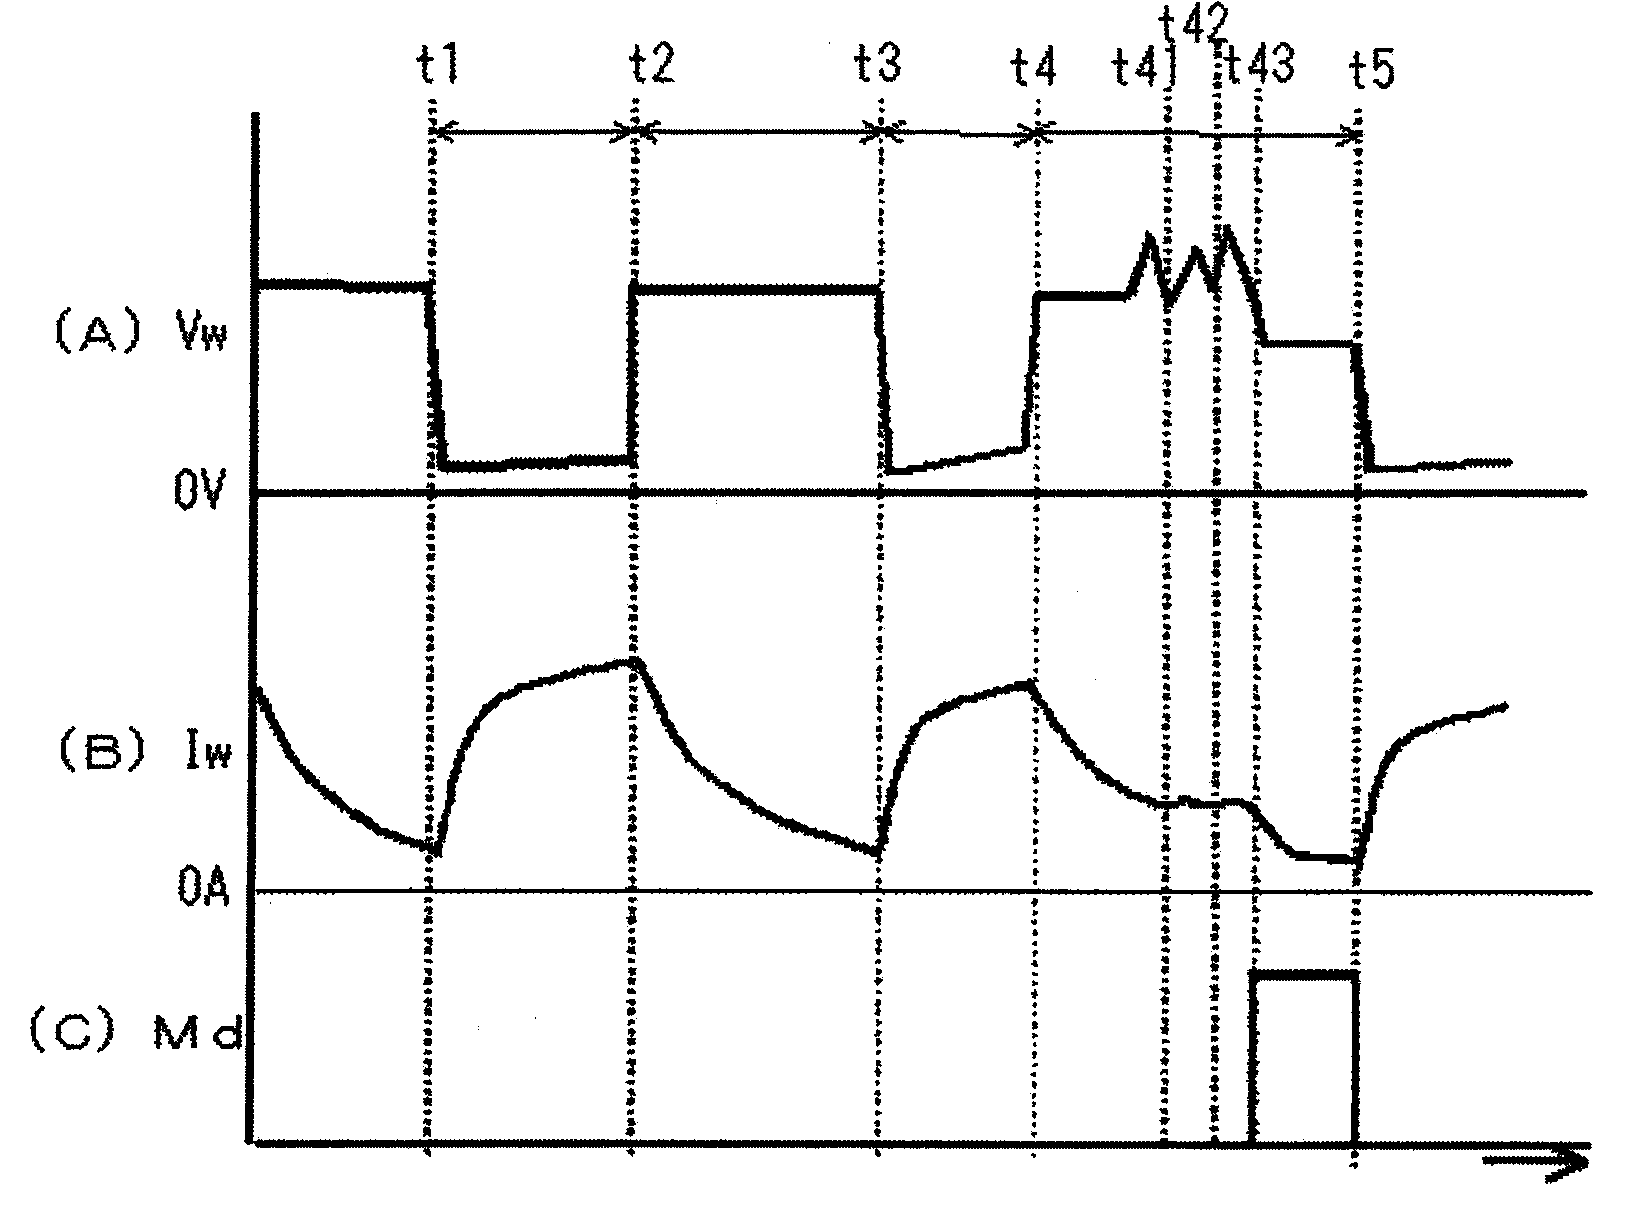 Welding source output control method